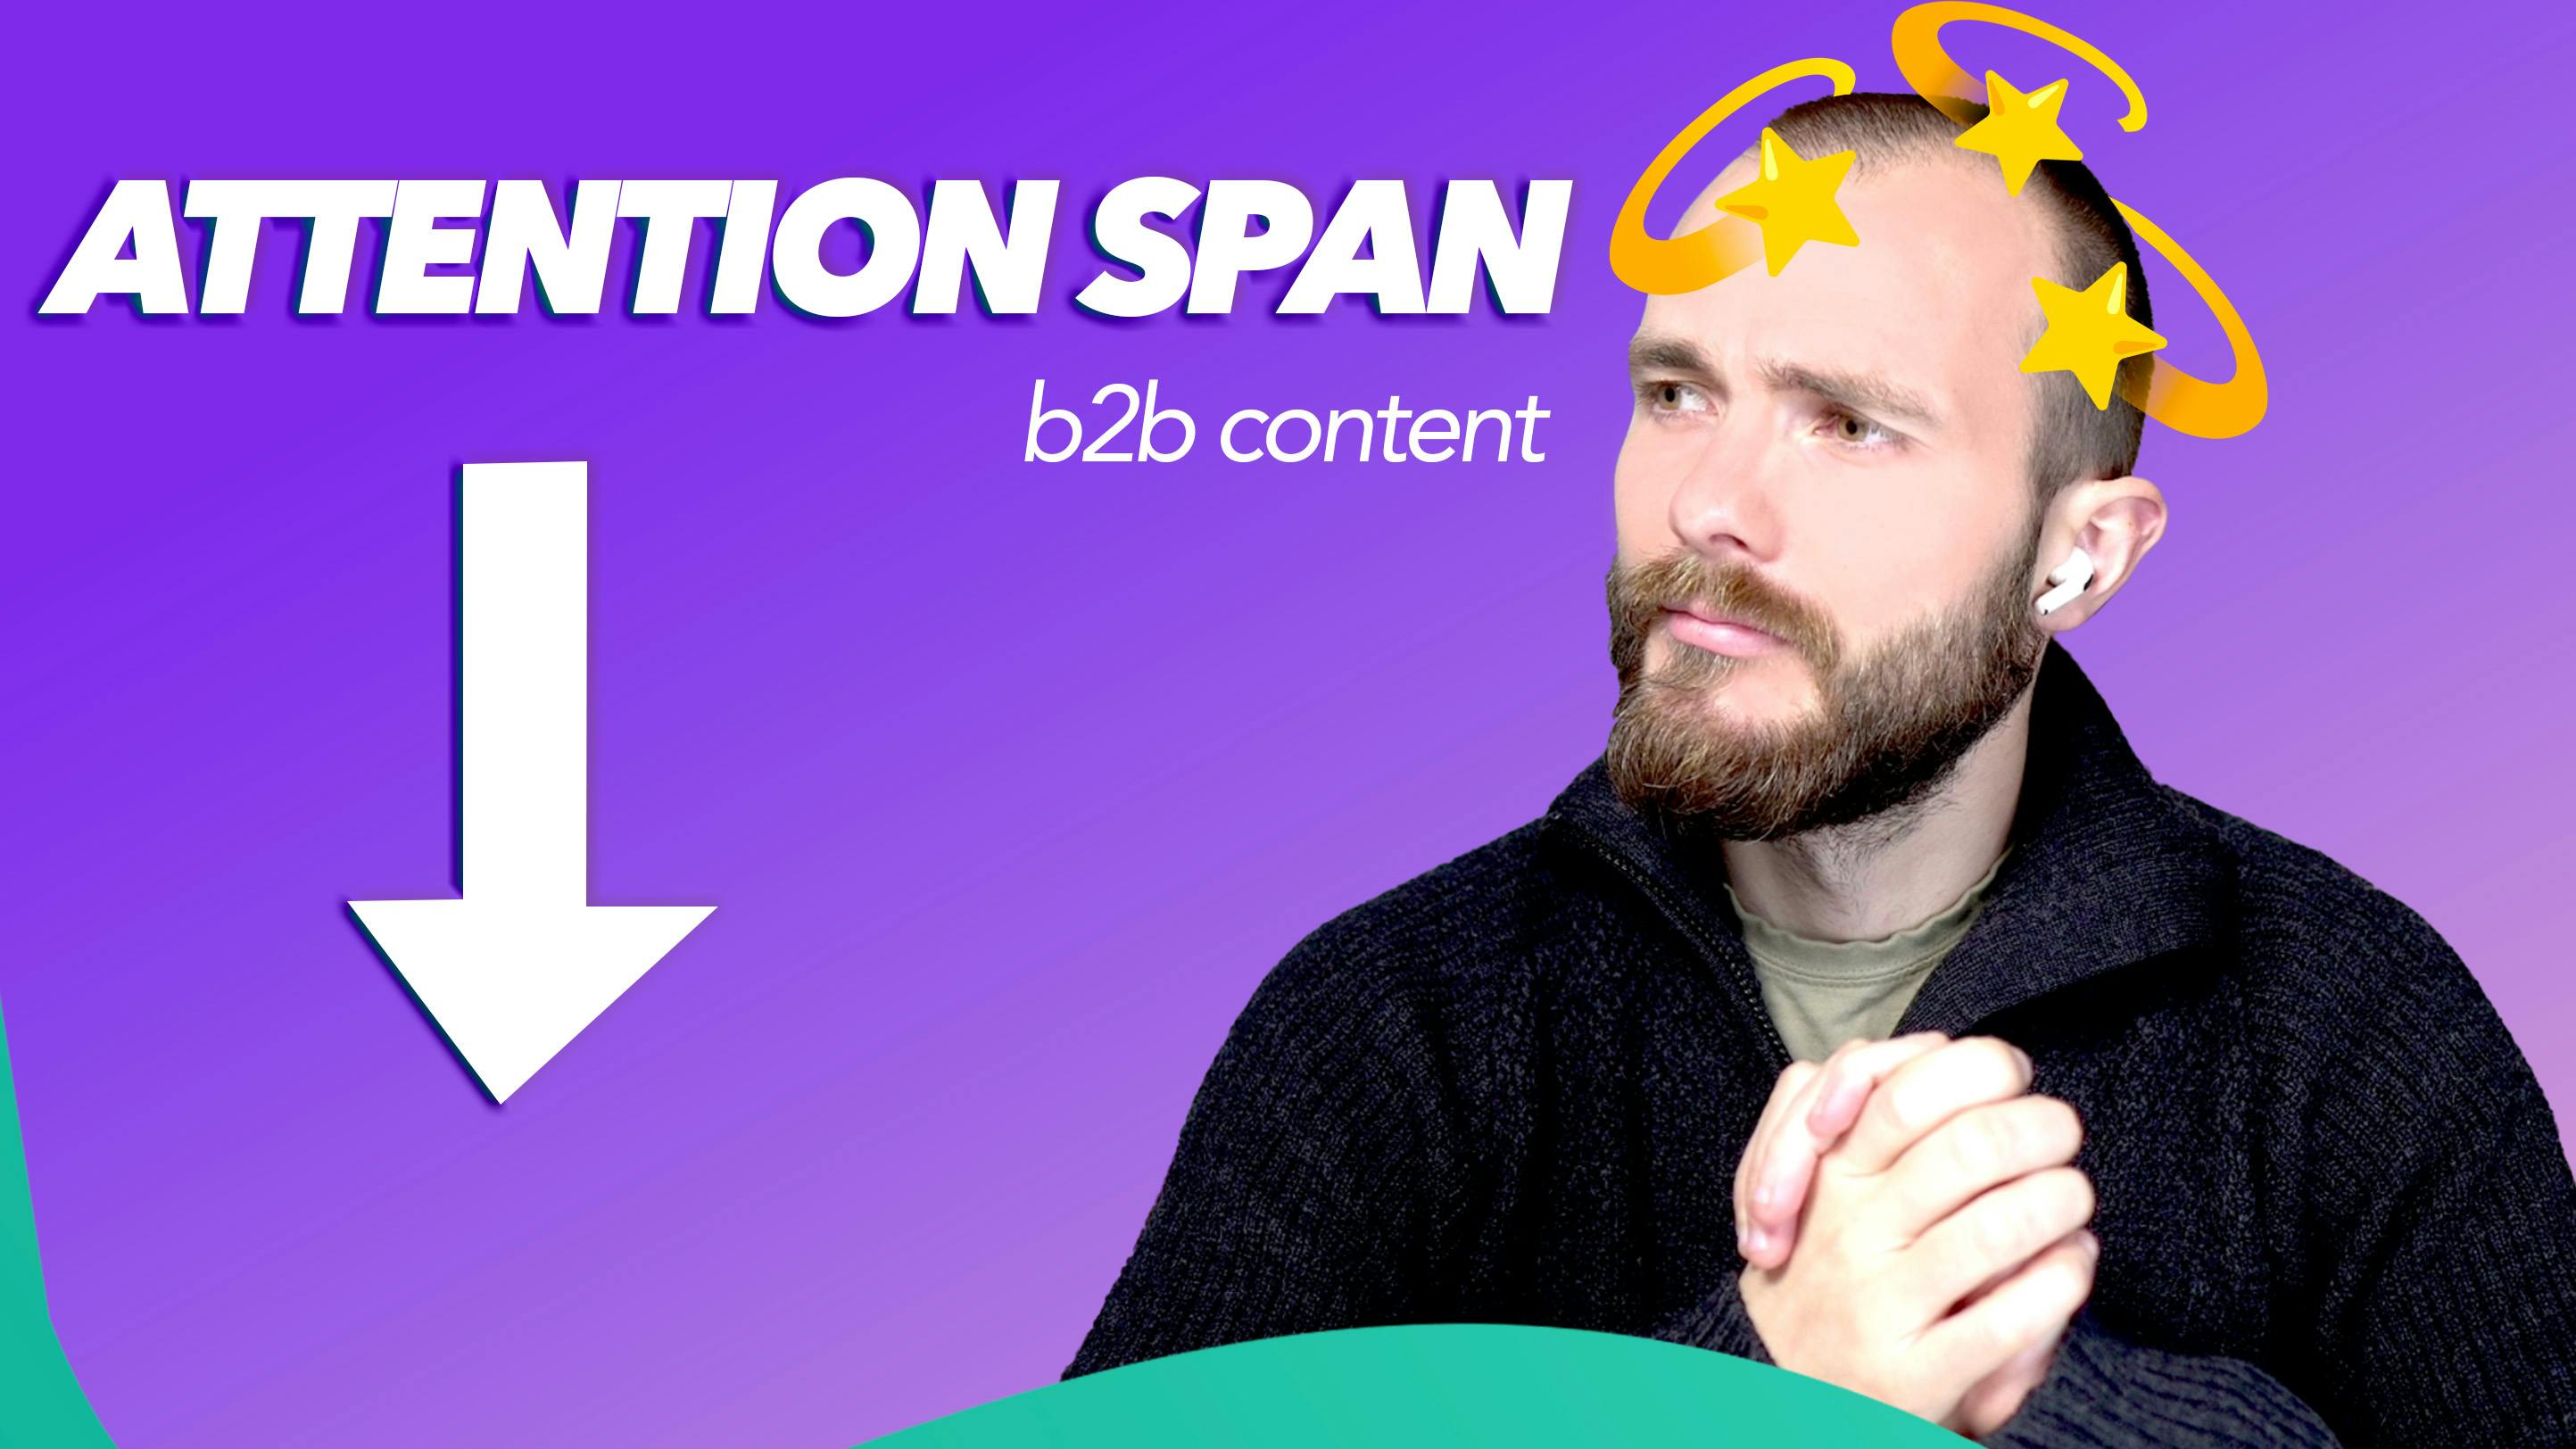 Attention span shrinks 🤯 - Your new B2B marketing mix needs